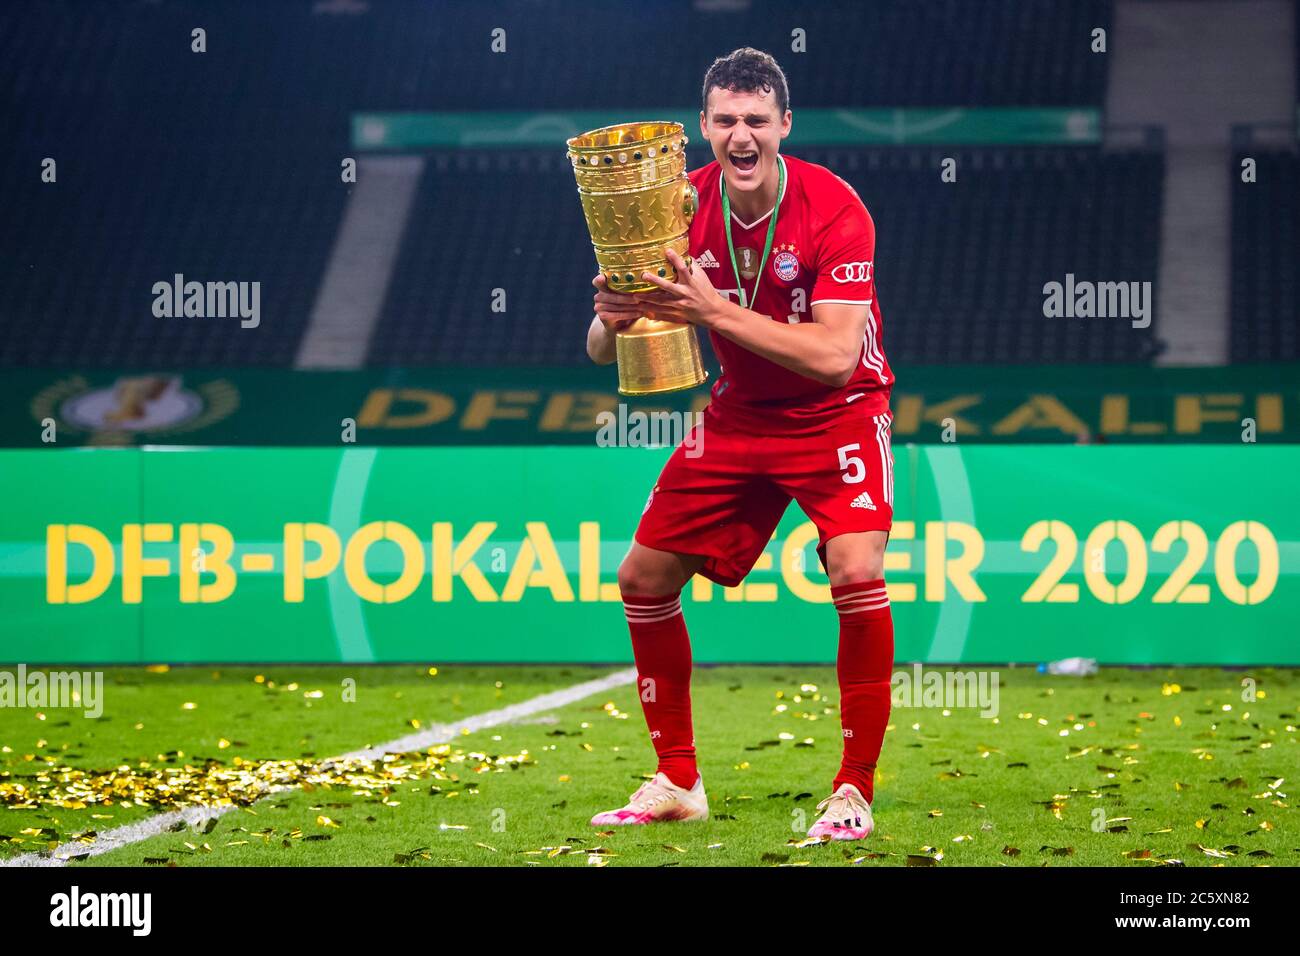 Berlin, Germany, 4 th July 2020,  Benjamin PAVARD, FCB 5   with trophy at the DFB Pokal Final match  FC BAYERN MUENCHEN - BAYER 04 LEVERKUSEN 4-2  in season 2019/2020 , FCB Foto: © Peter Schatz / Alamy Live News / Kevin Voigt/Jan Huebner/Pool   - DFB REGULATIONS PROHIBIT ANY USE OF PHOTOGRAPHS as IMAGE SEQUENCES and/or QUASI-VIDEO -  National and international News-Agencies OUT Editorial Use ONLY Stock Photo